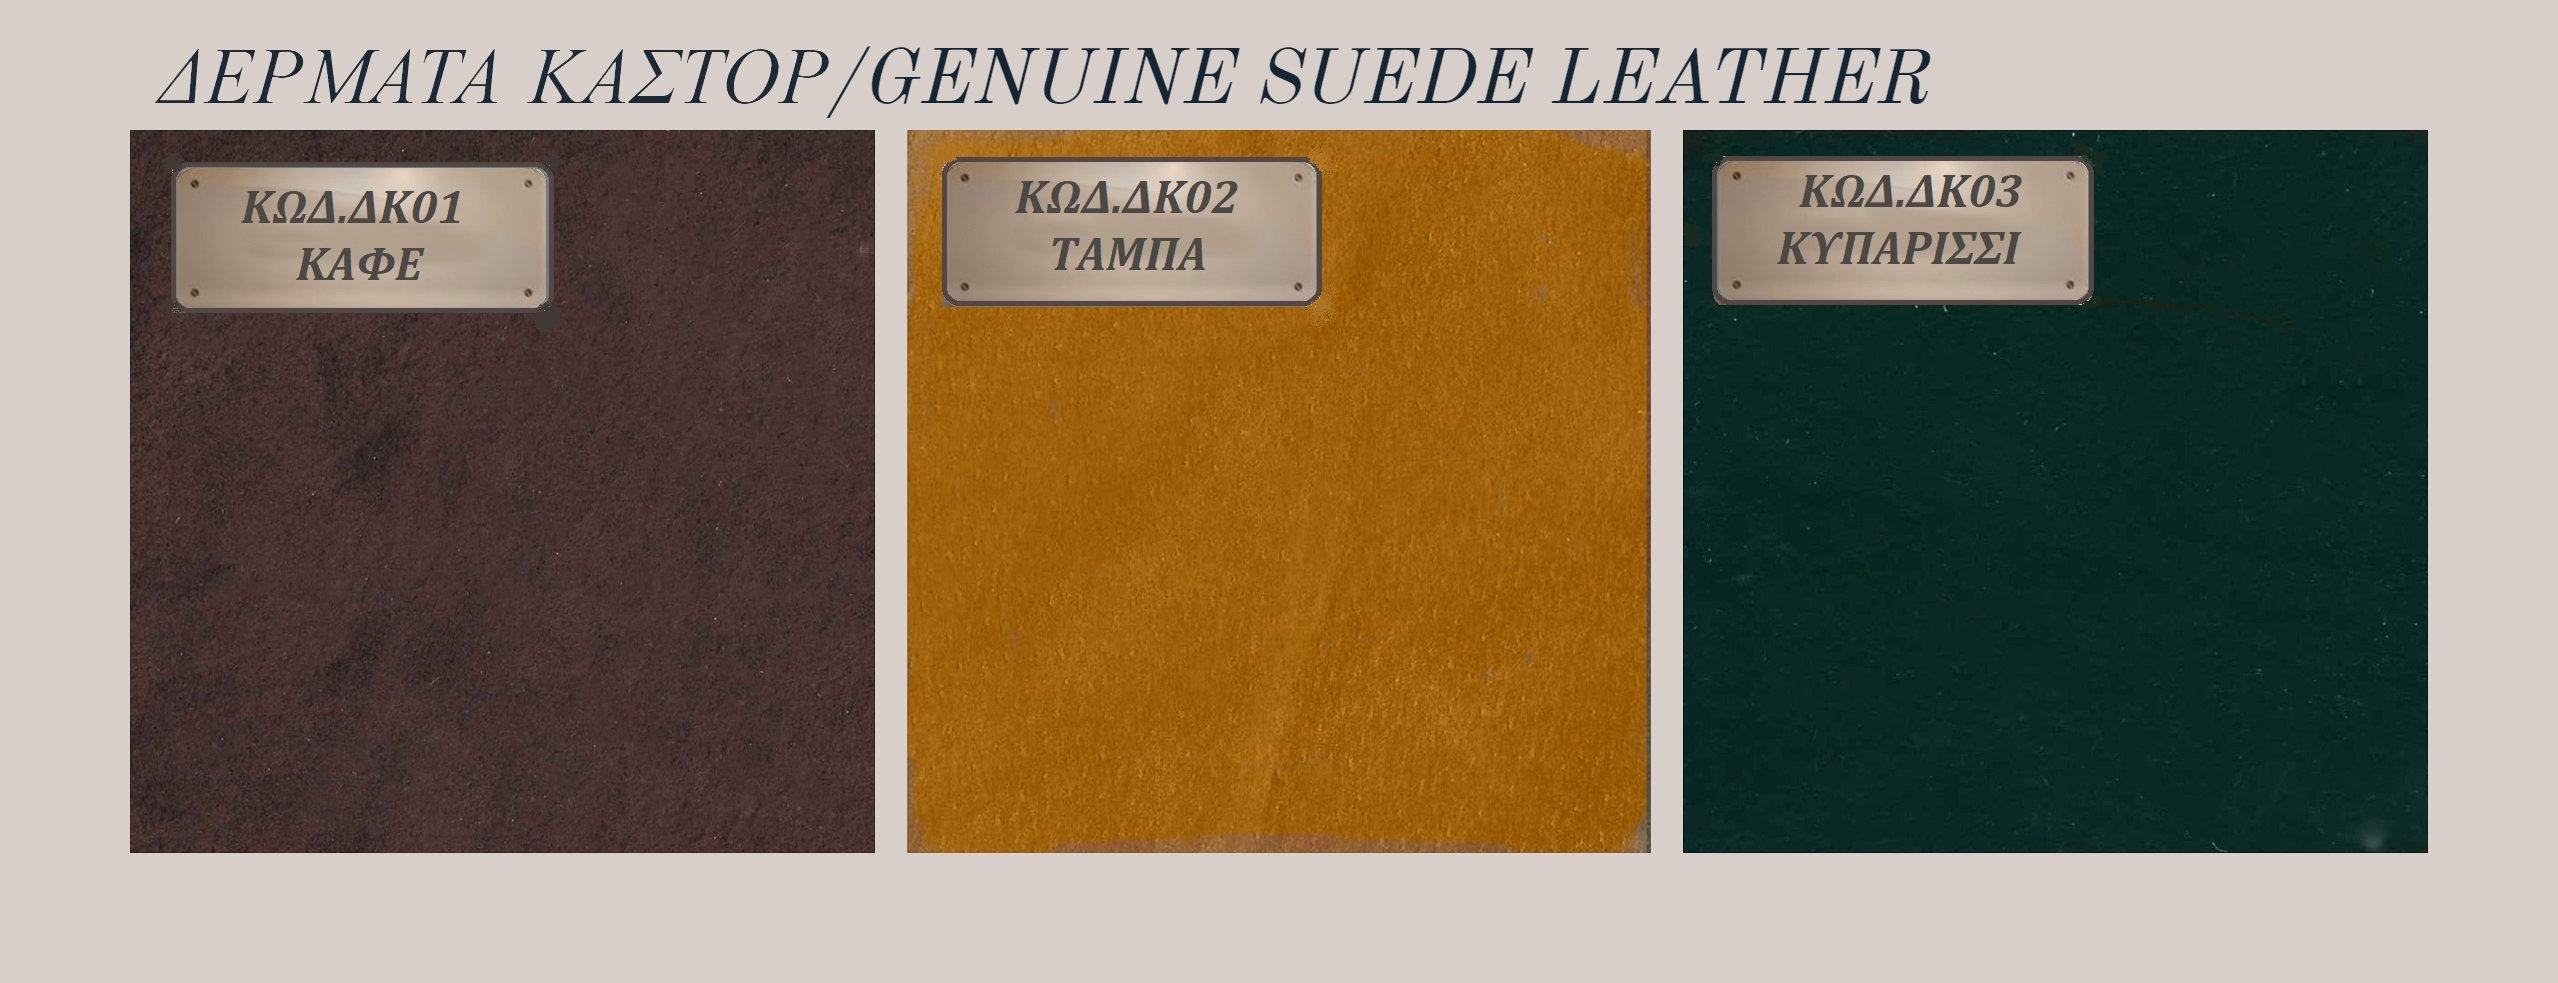 images/Items/Materials/03.GENUINE SUEDE LEATHER.jpg